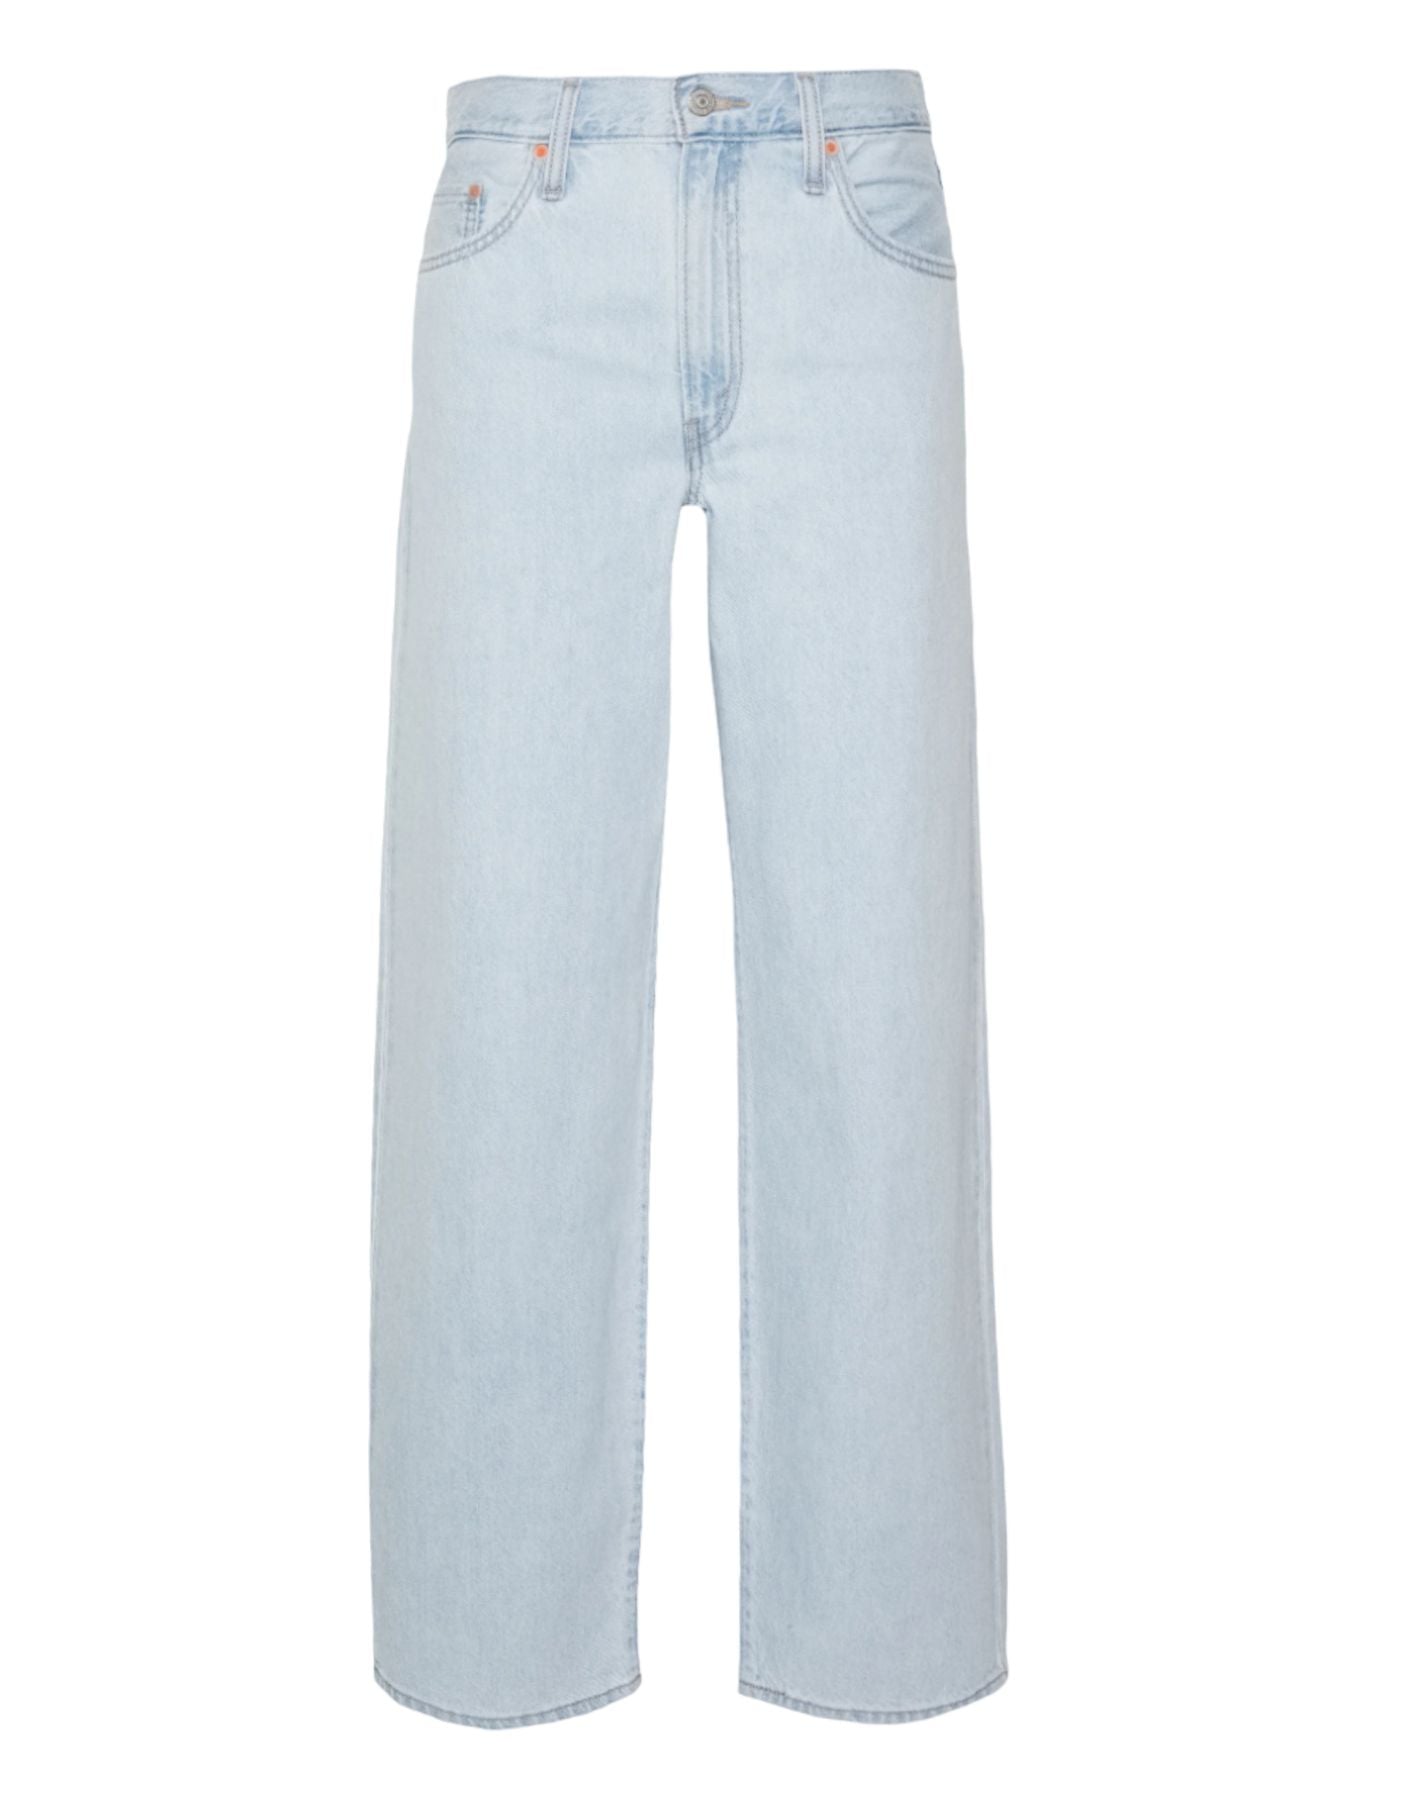 Jeans para mujer A34940033 Levi's